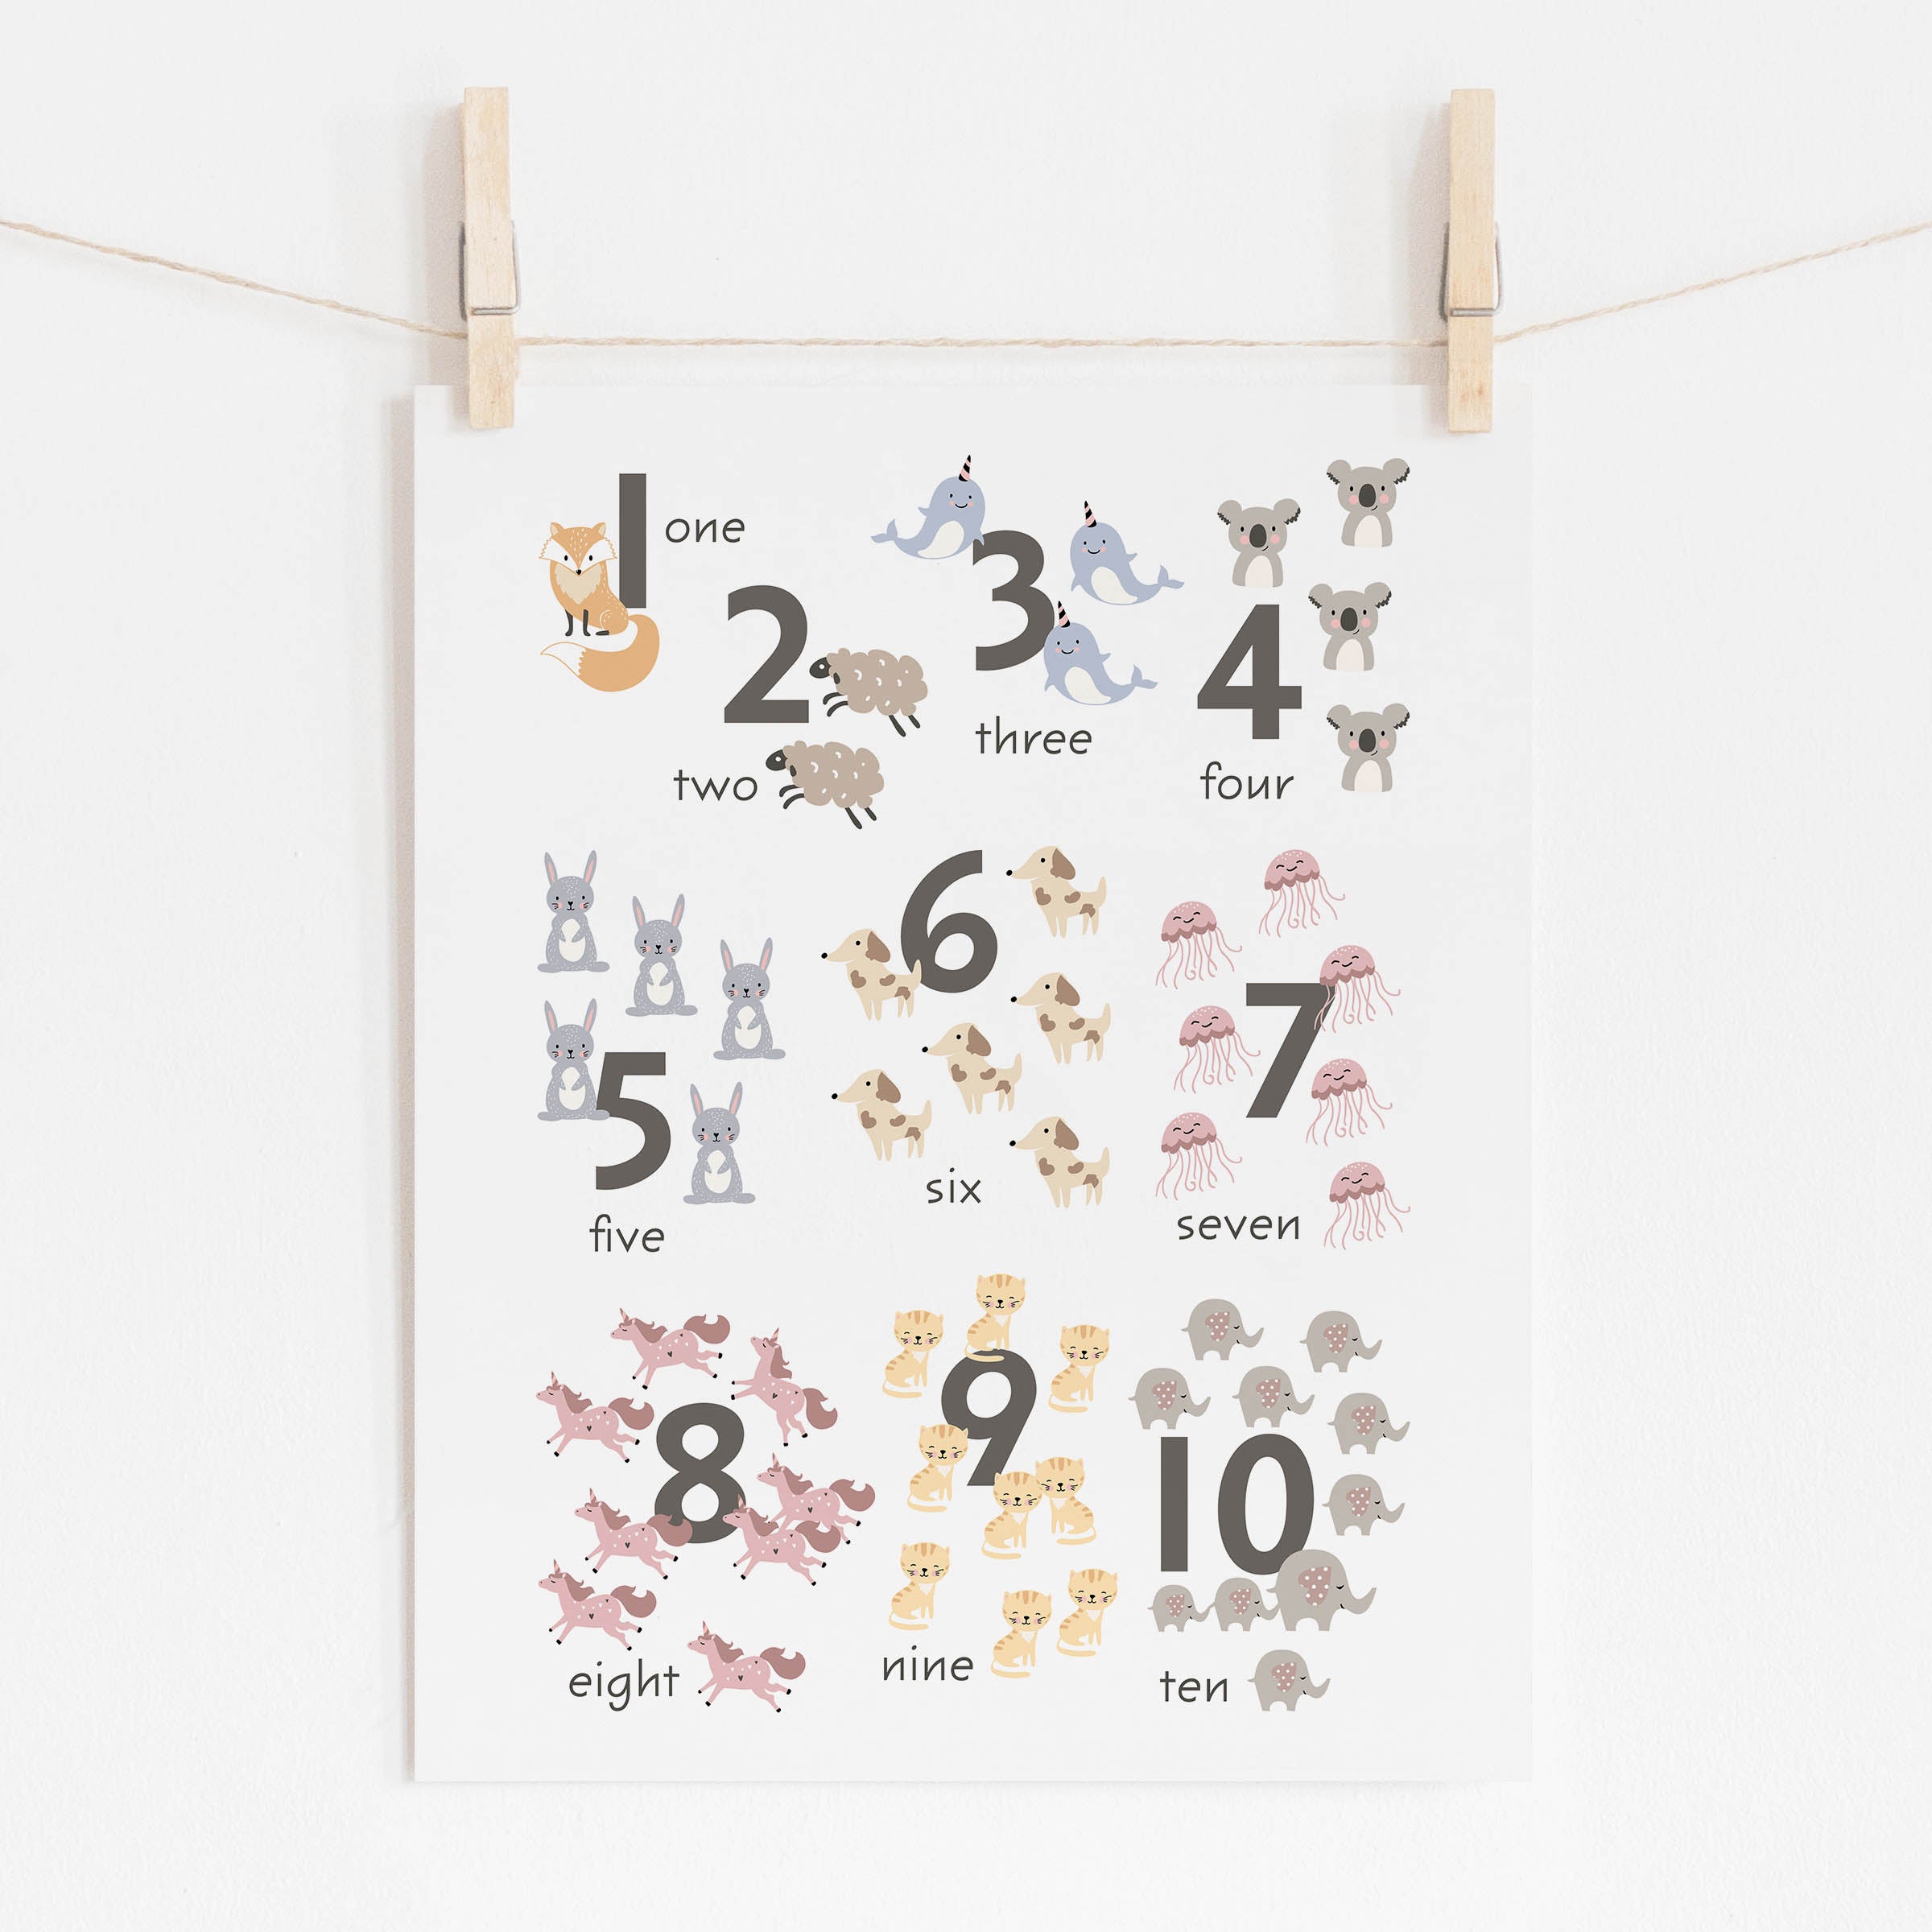 Cute Animal Numbers Poster, 1-10